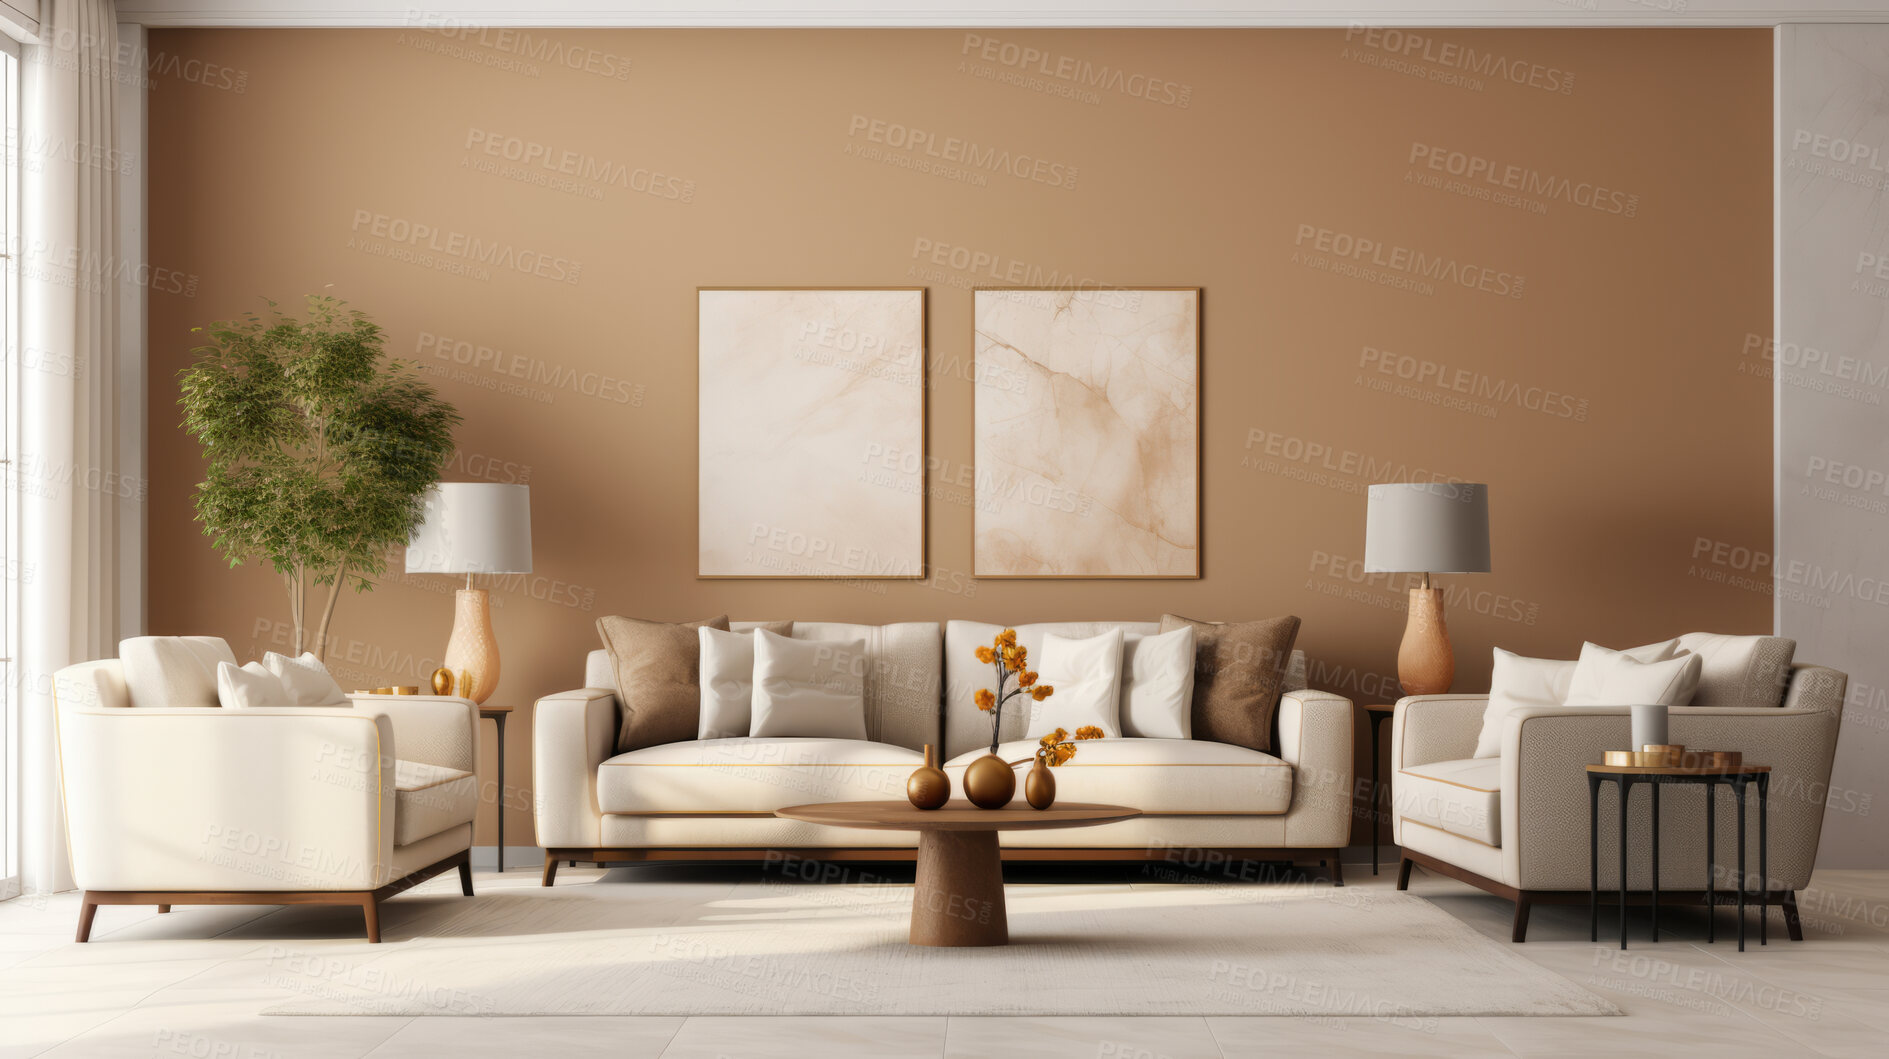 Buy stock photo Luxury living room interior. Brown walls, modern lounge set and abstract art on background